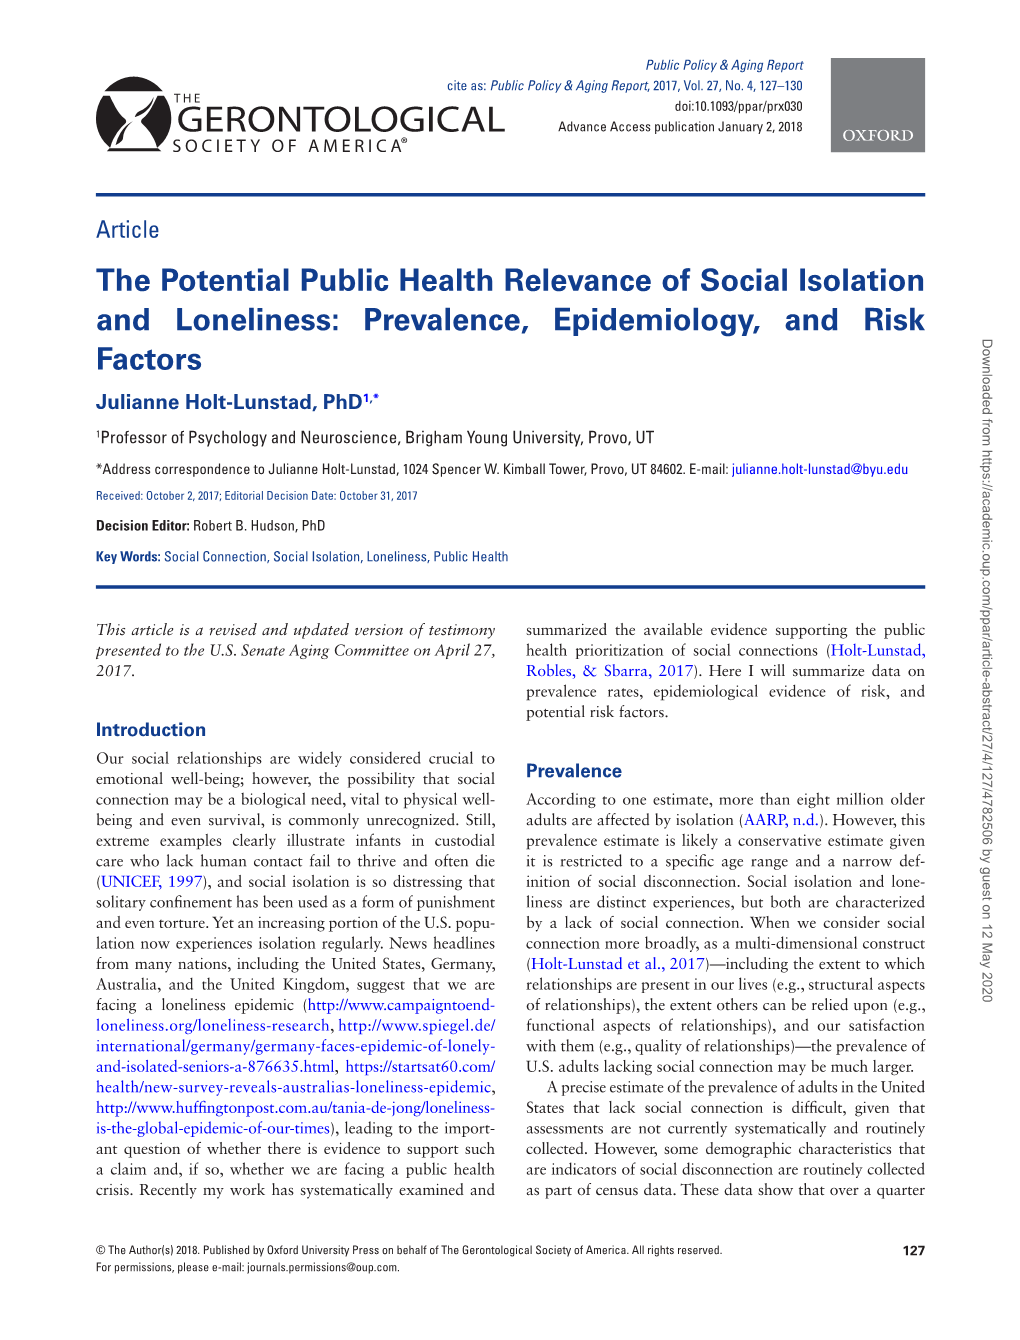 The Potential Public Health Relevance of Social Isolation And